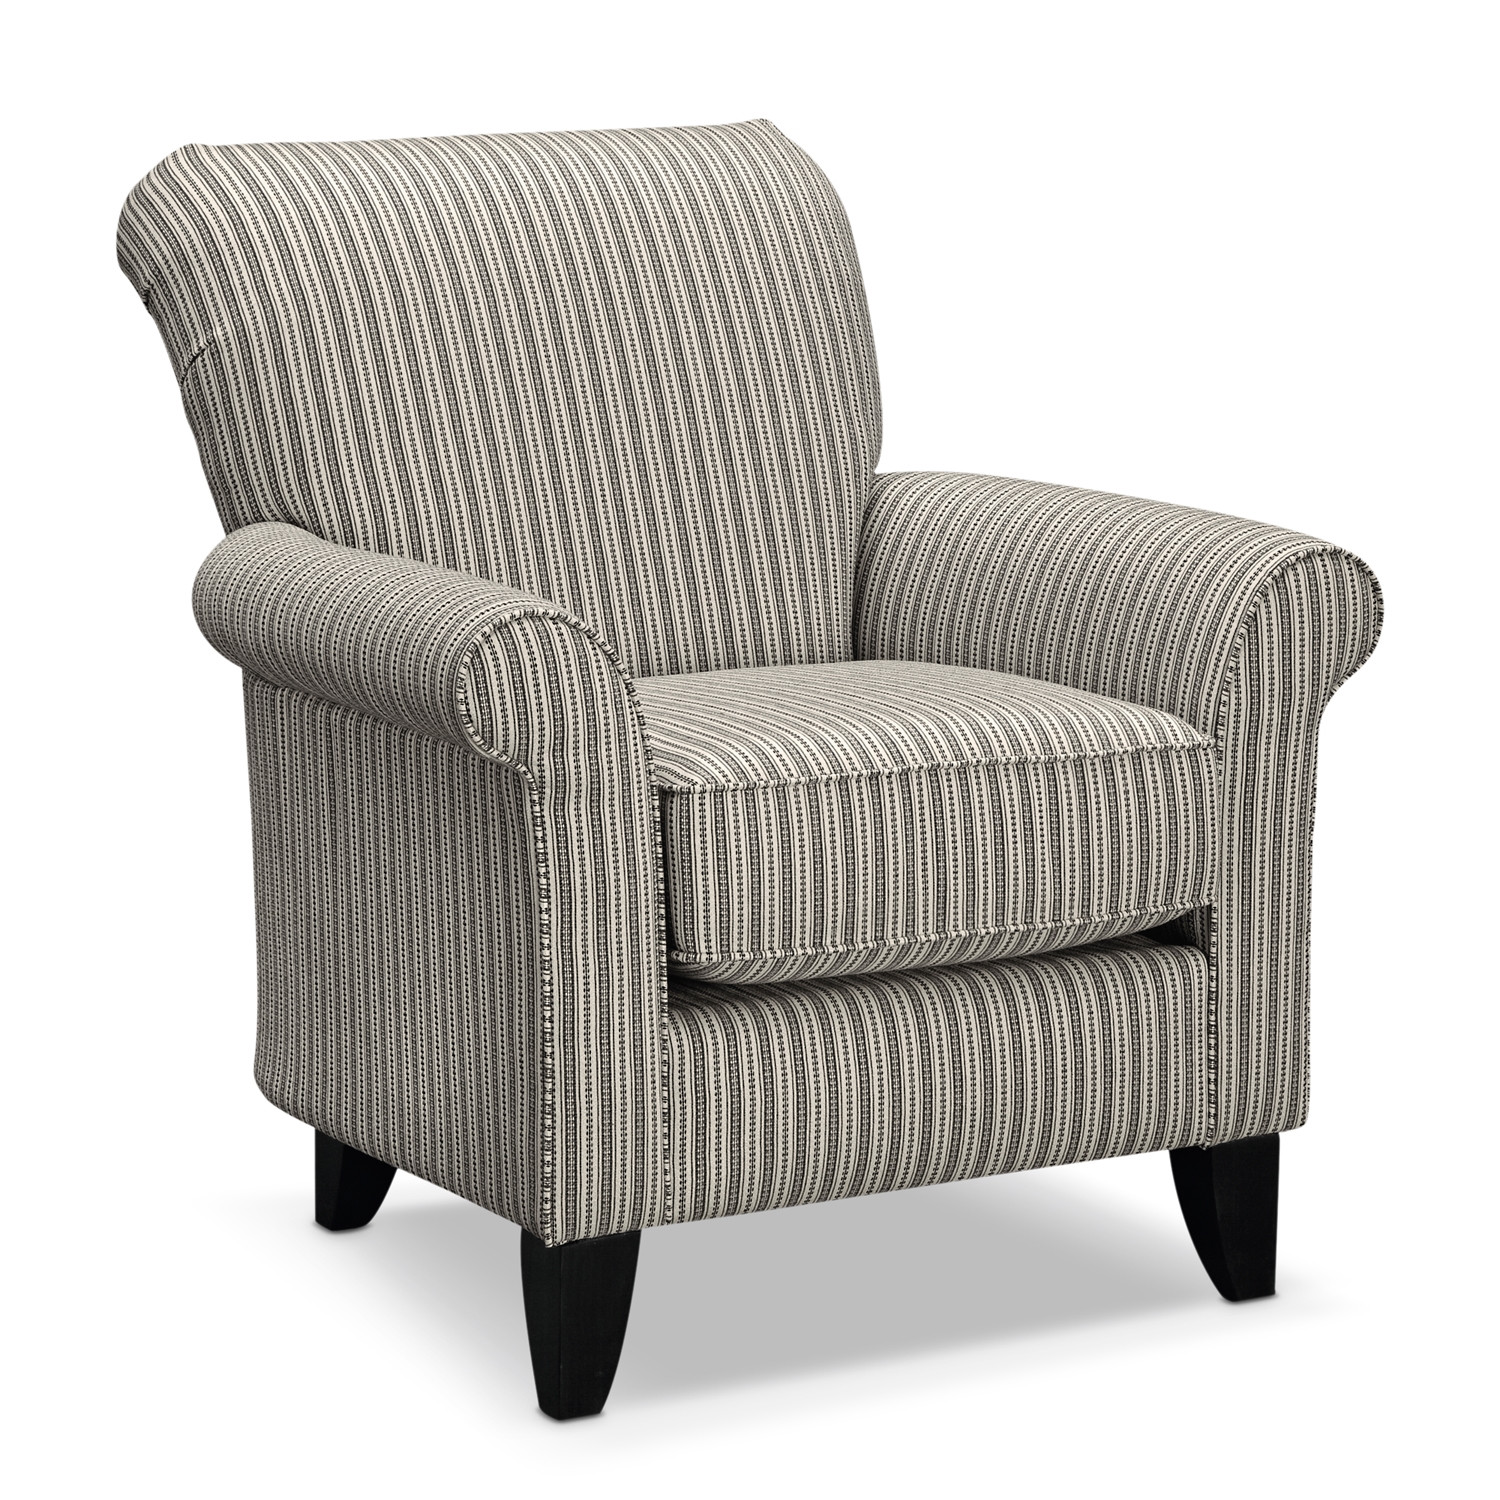 Lounge Chairs For Living Room
 Criterion of fortable Chairs for Living Room – HomesFeed